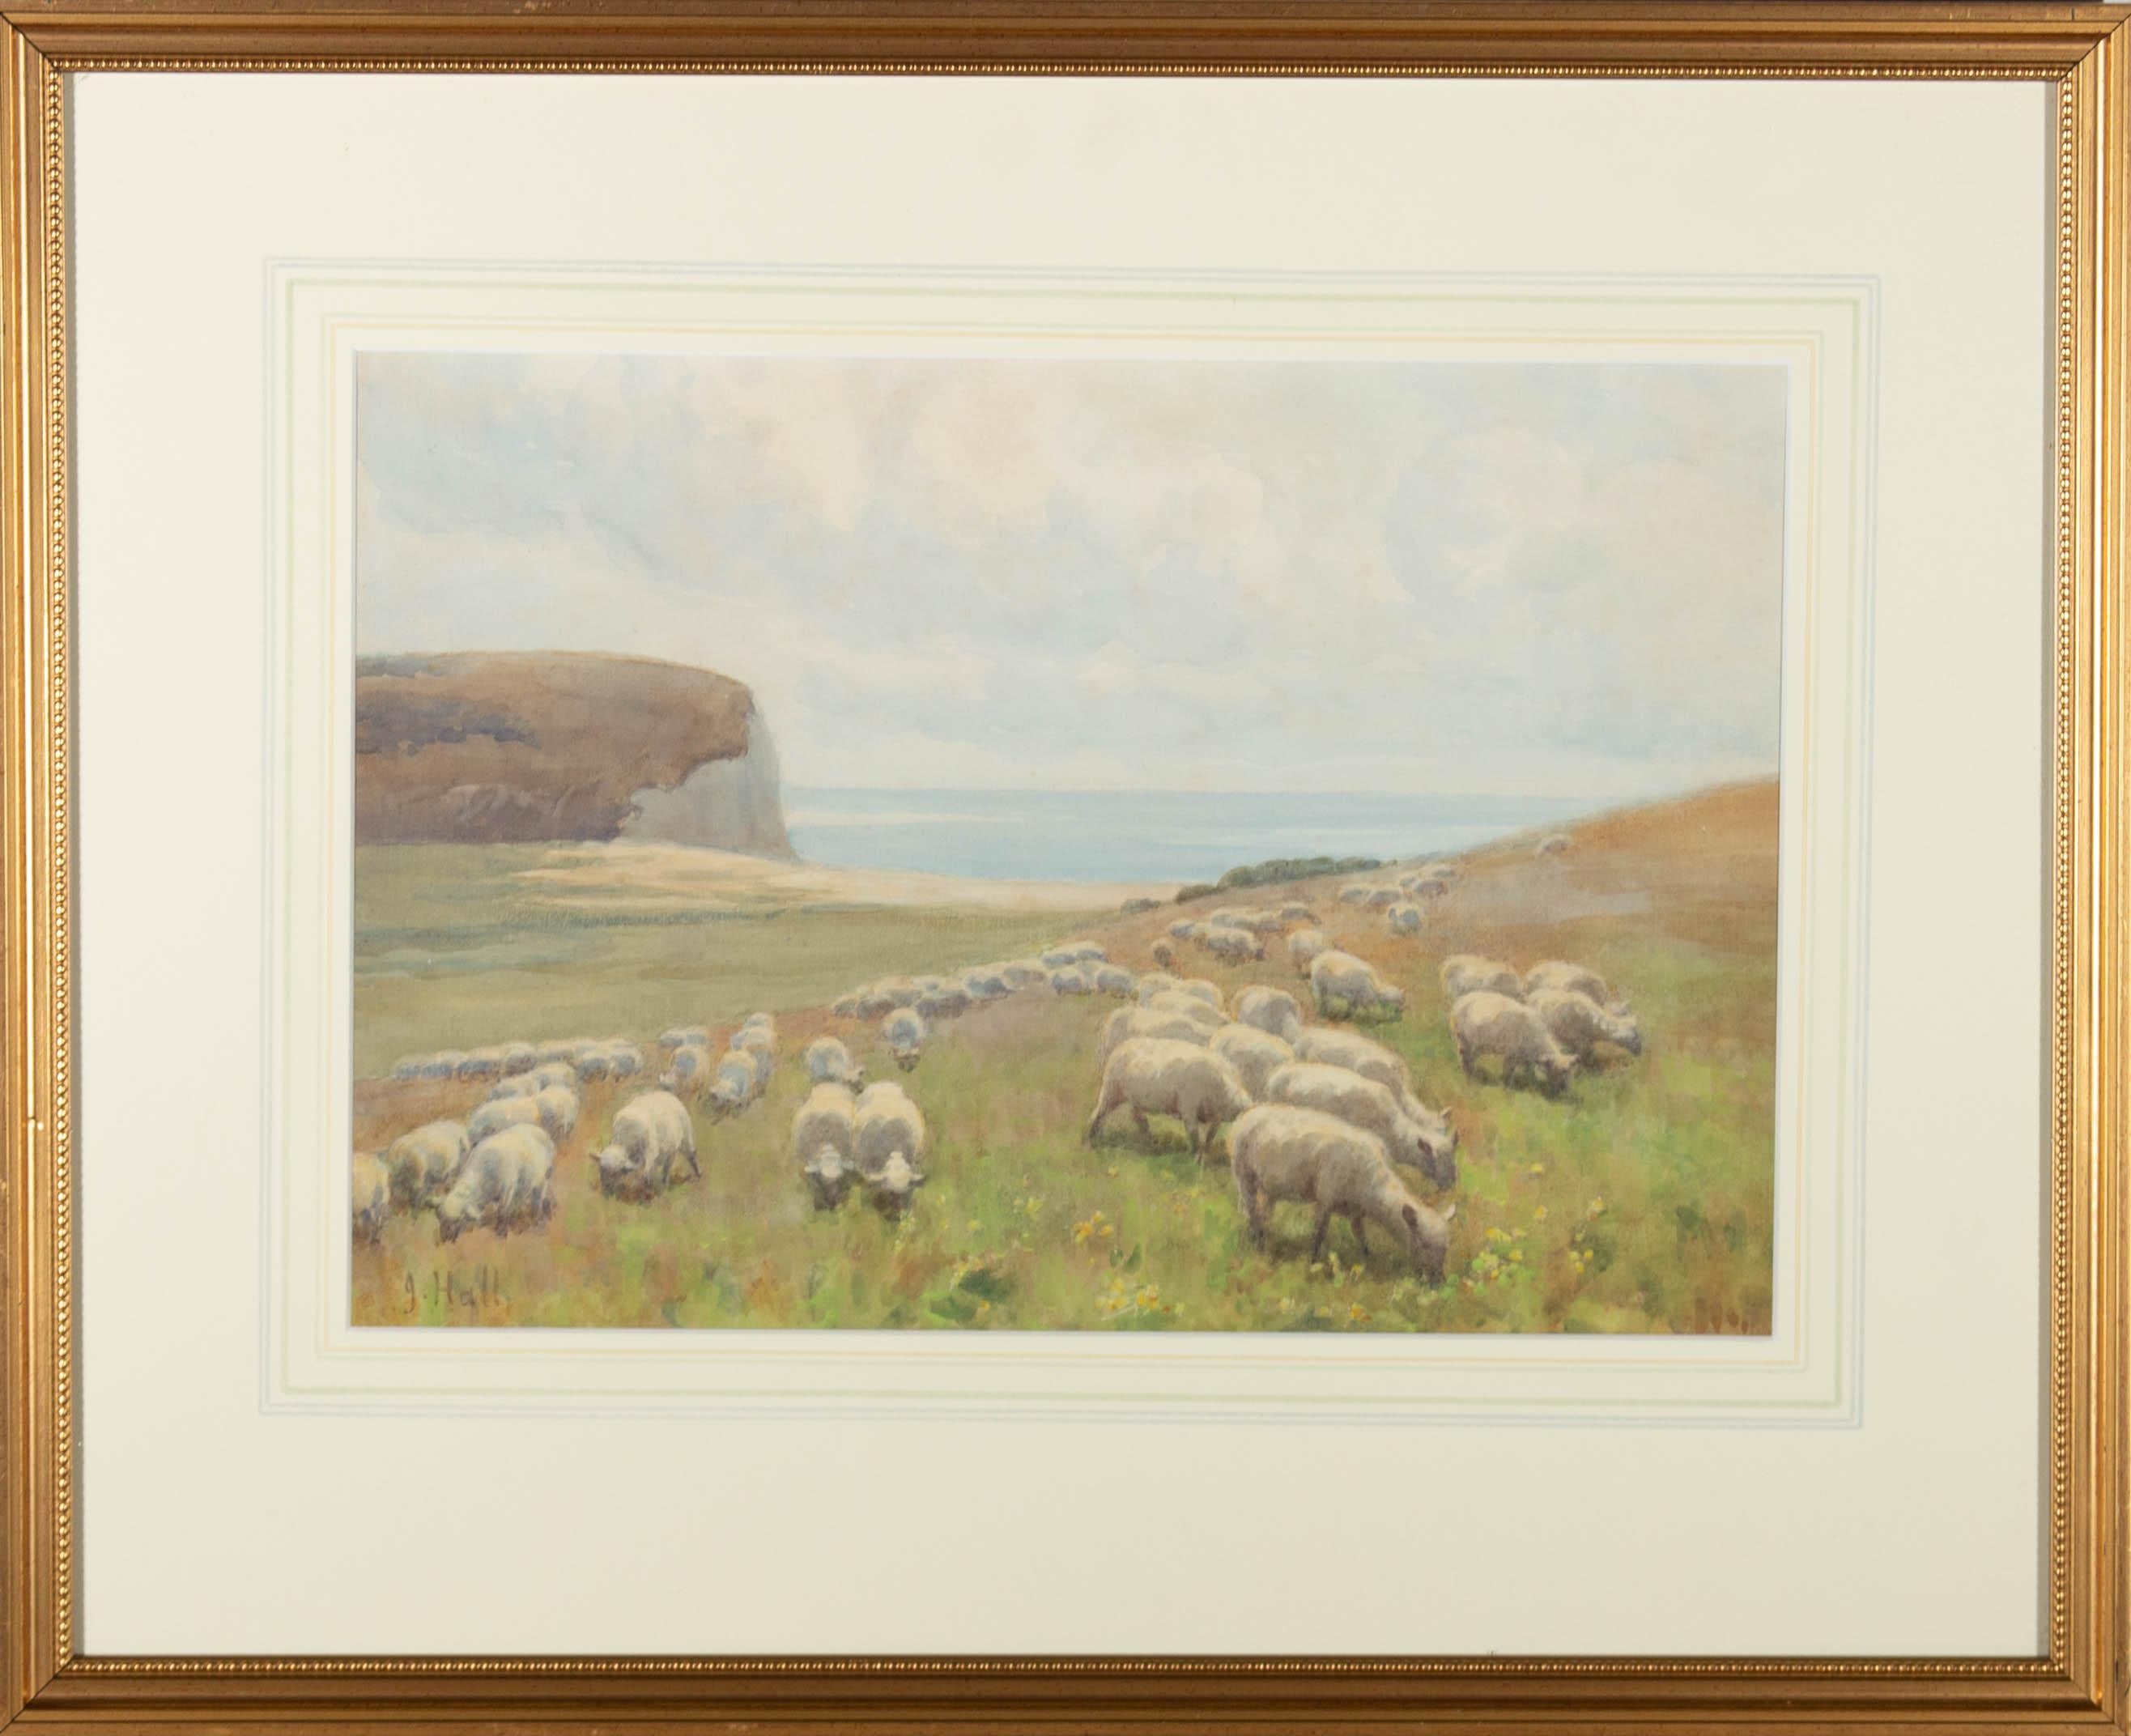 Jessie Hall (1858-1914) - Watercolour, Grazing sheep, South Downs 1